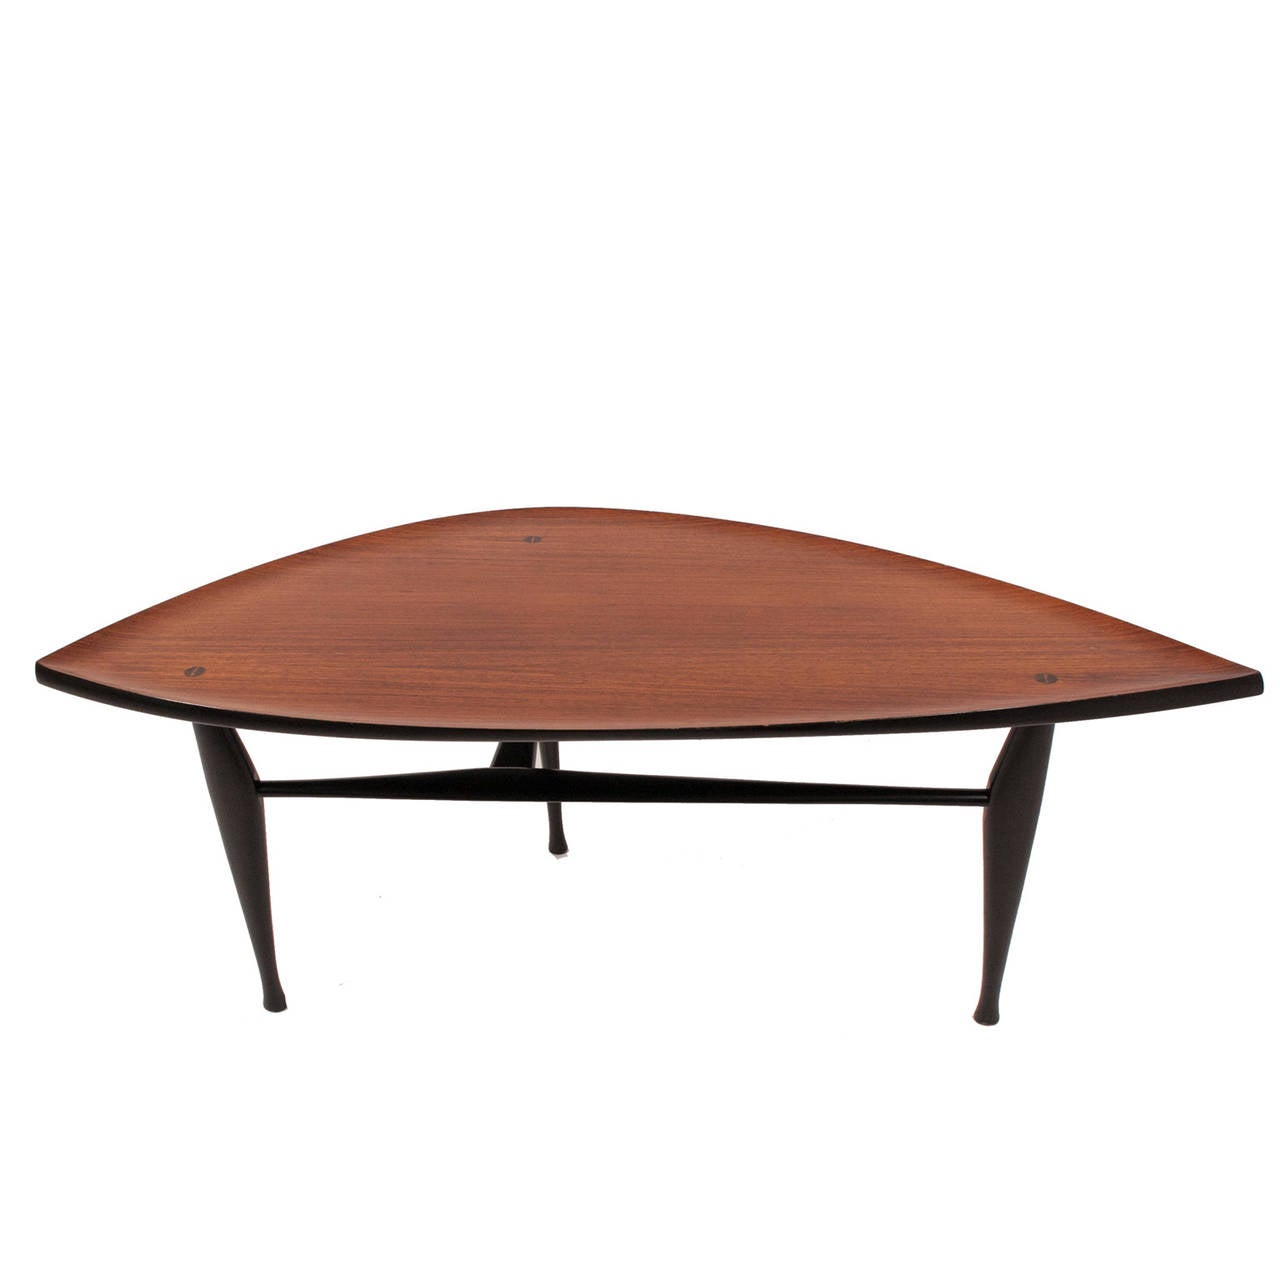 Table with rosewood leaf shaped top on black lacquered curved and tapering three leg base. Made by Westerbergs Furniture.